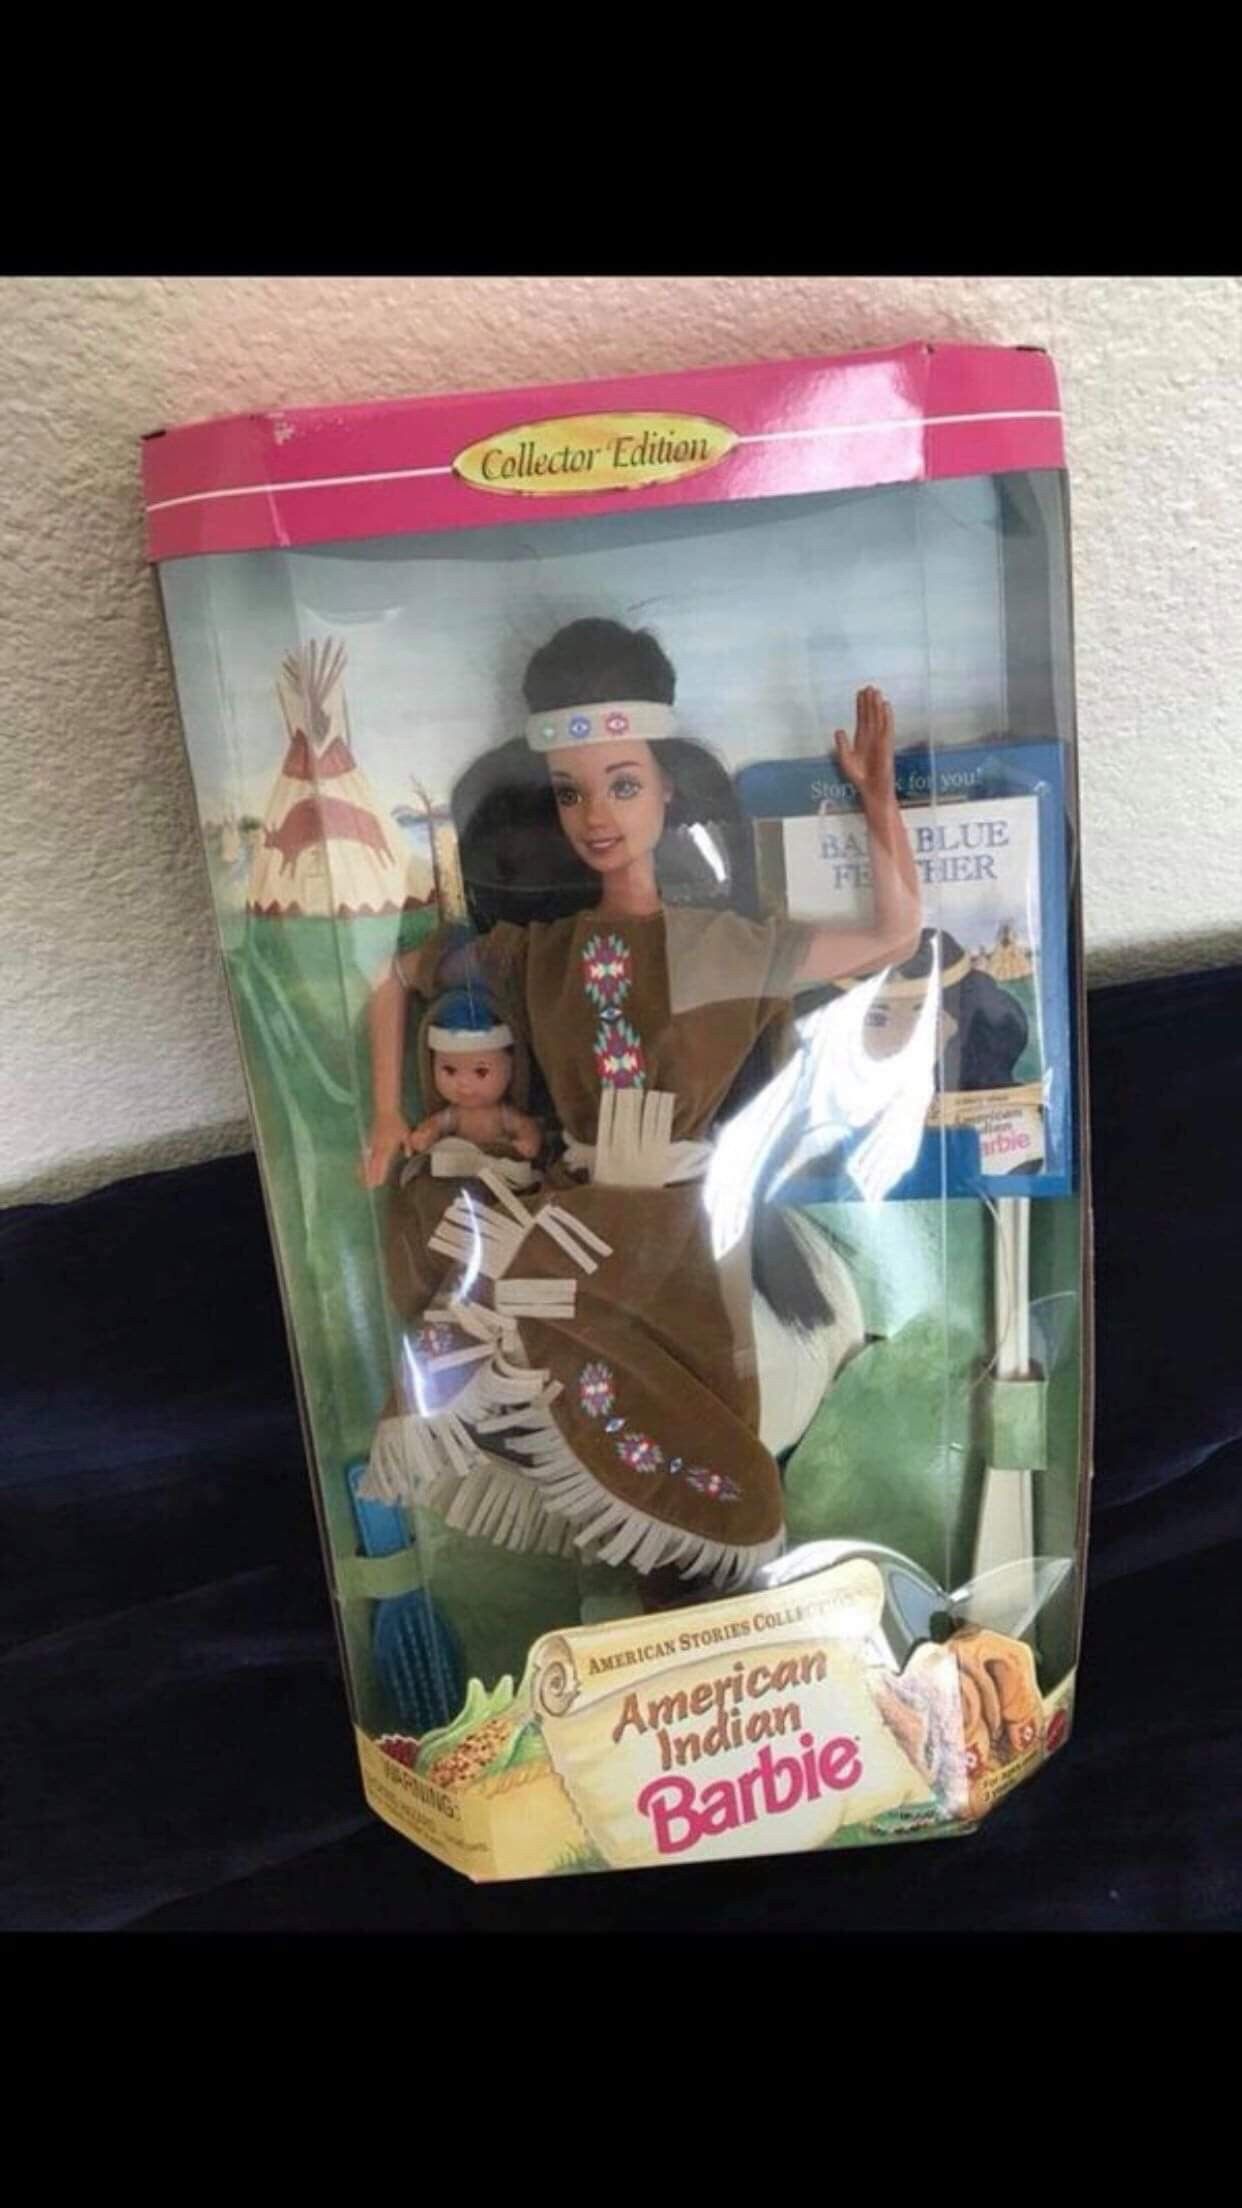 New American Indian barbie doll